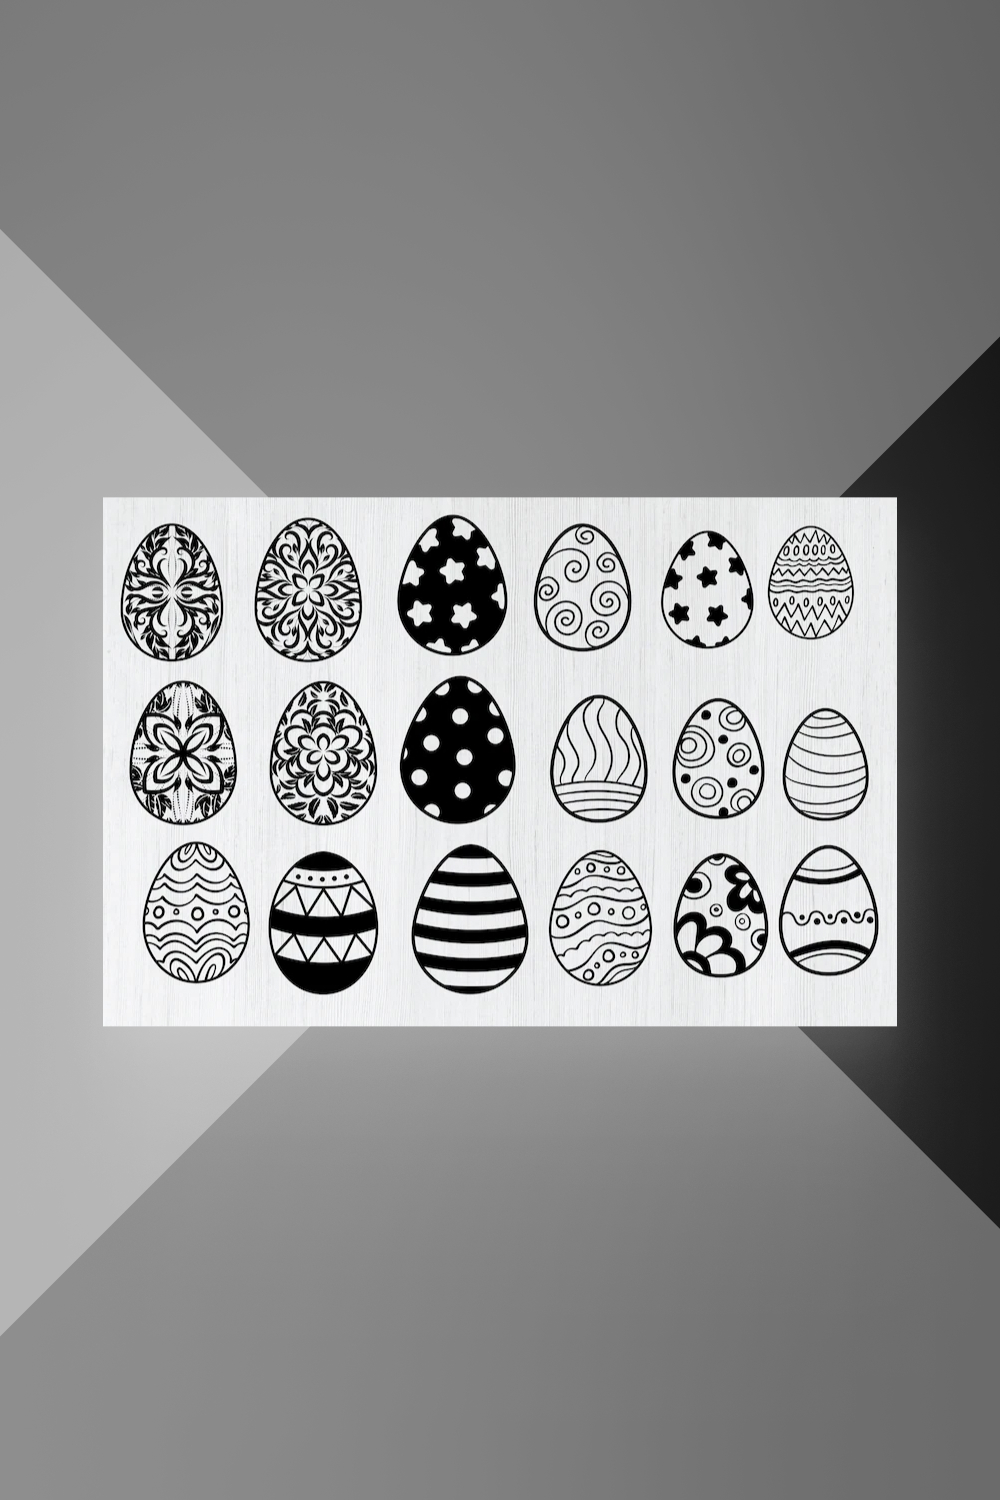 Modern and creative eggs for happy Easter day.